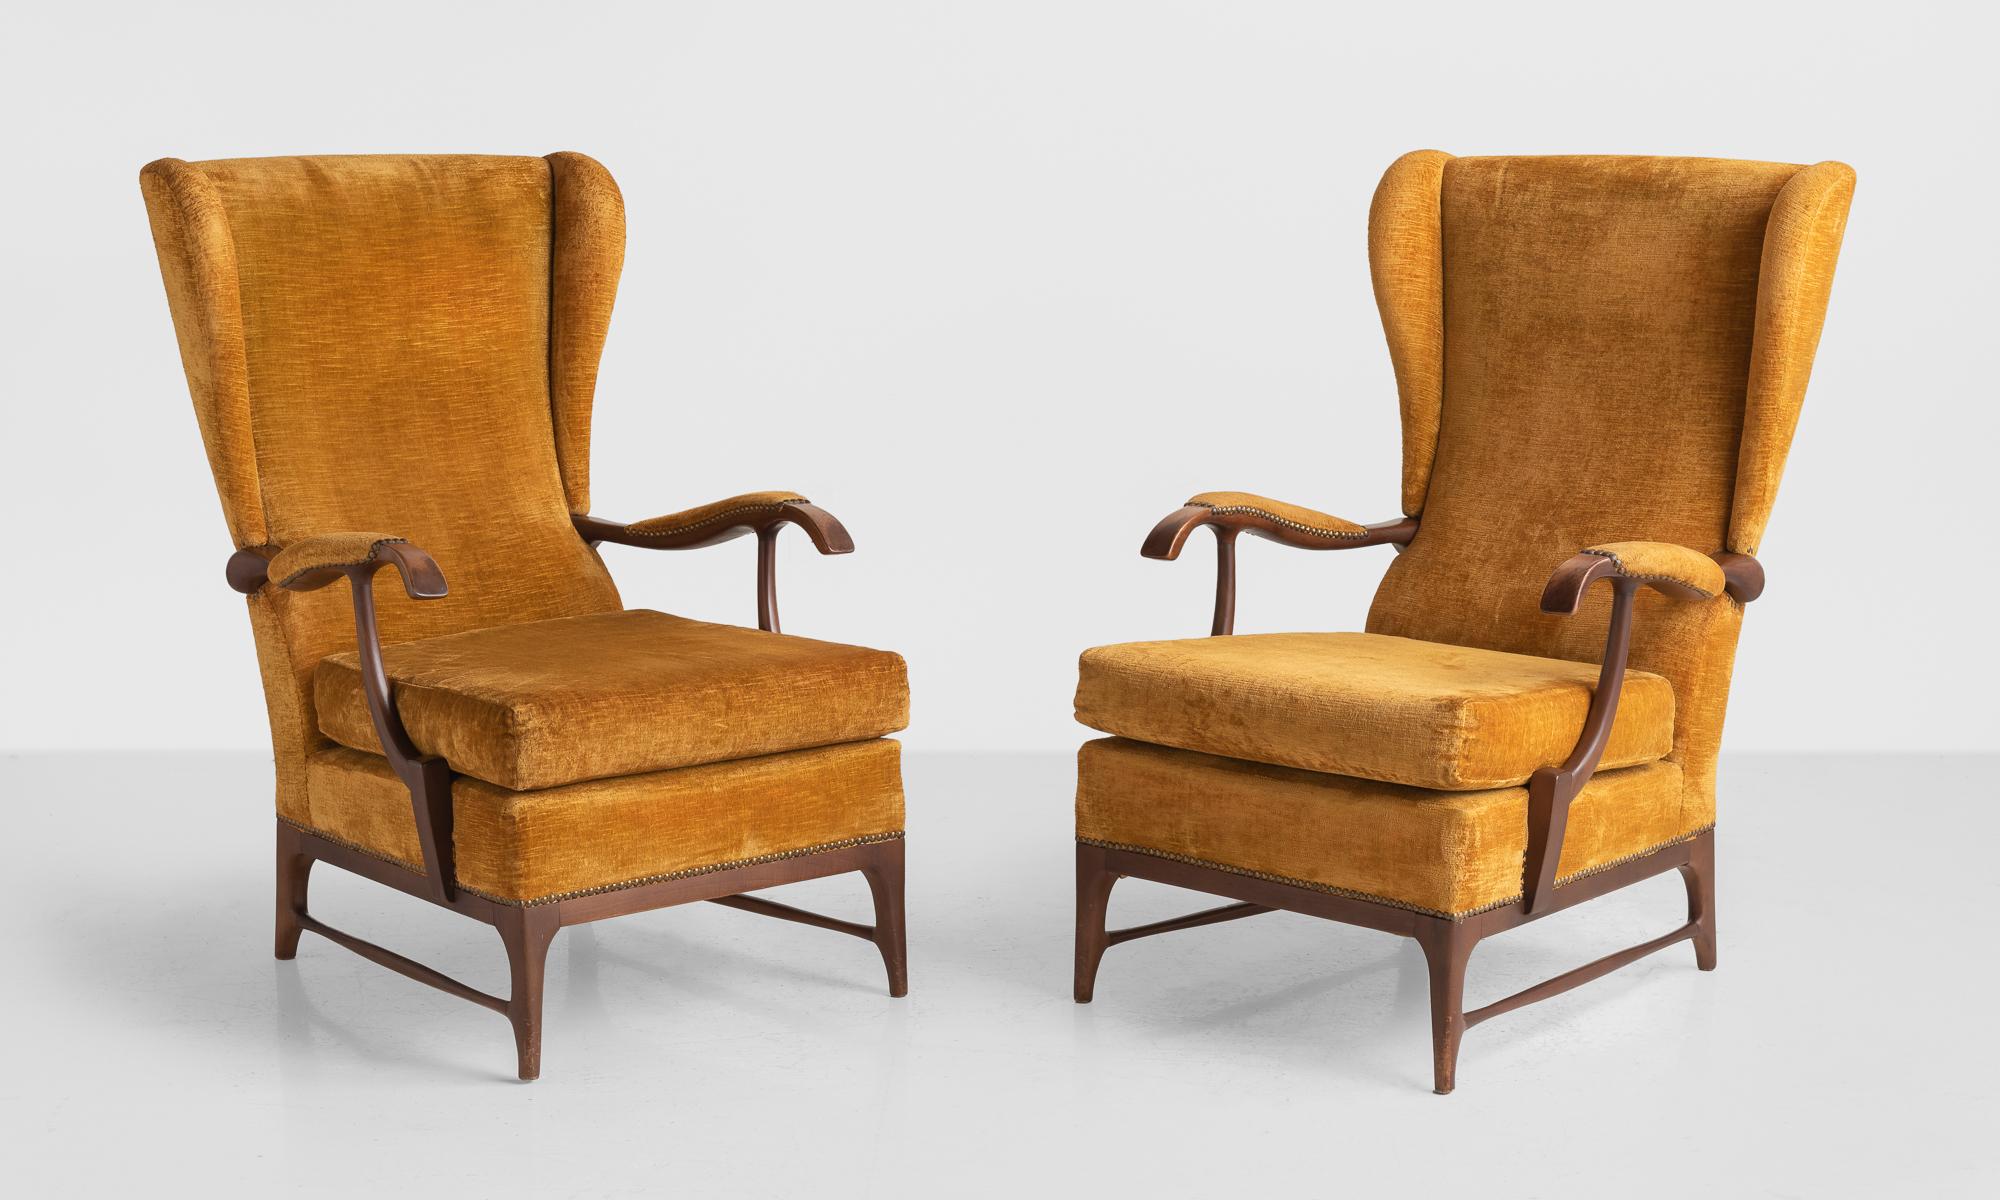 Pair of Paolo Buffa armchairs, Italy, circa 1960.

Designed by Paolo Buffa and manufactured by Framar. Carved wooden frame with original velvet upholstery fitted with brass nails.

Measures: 27